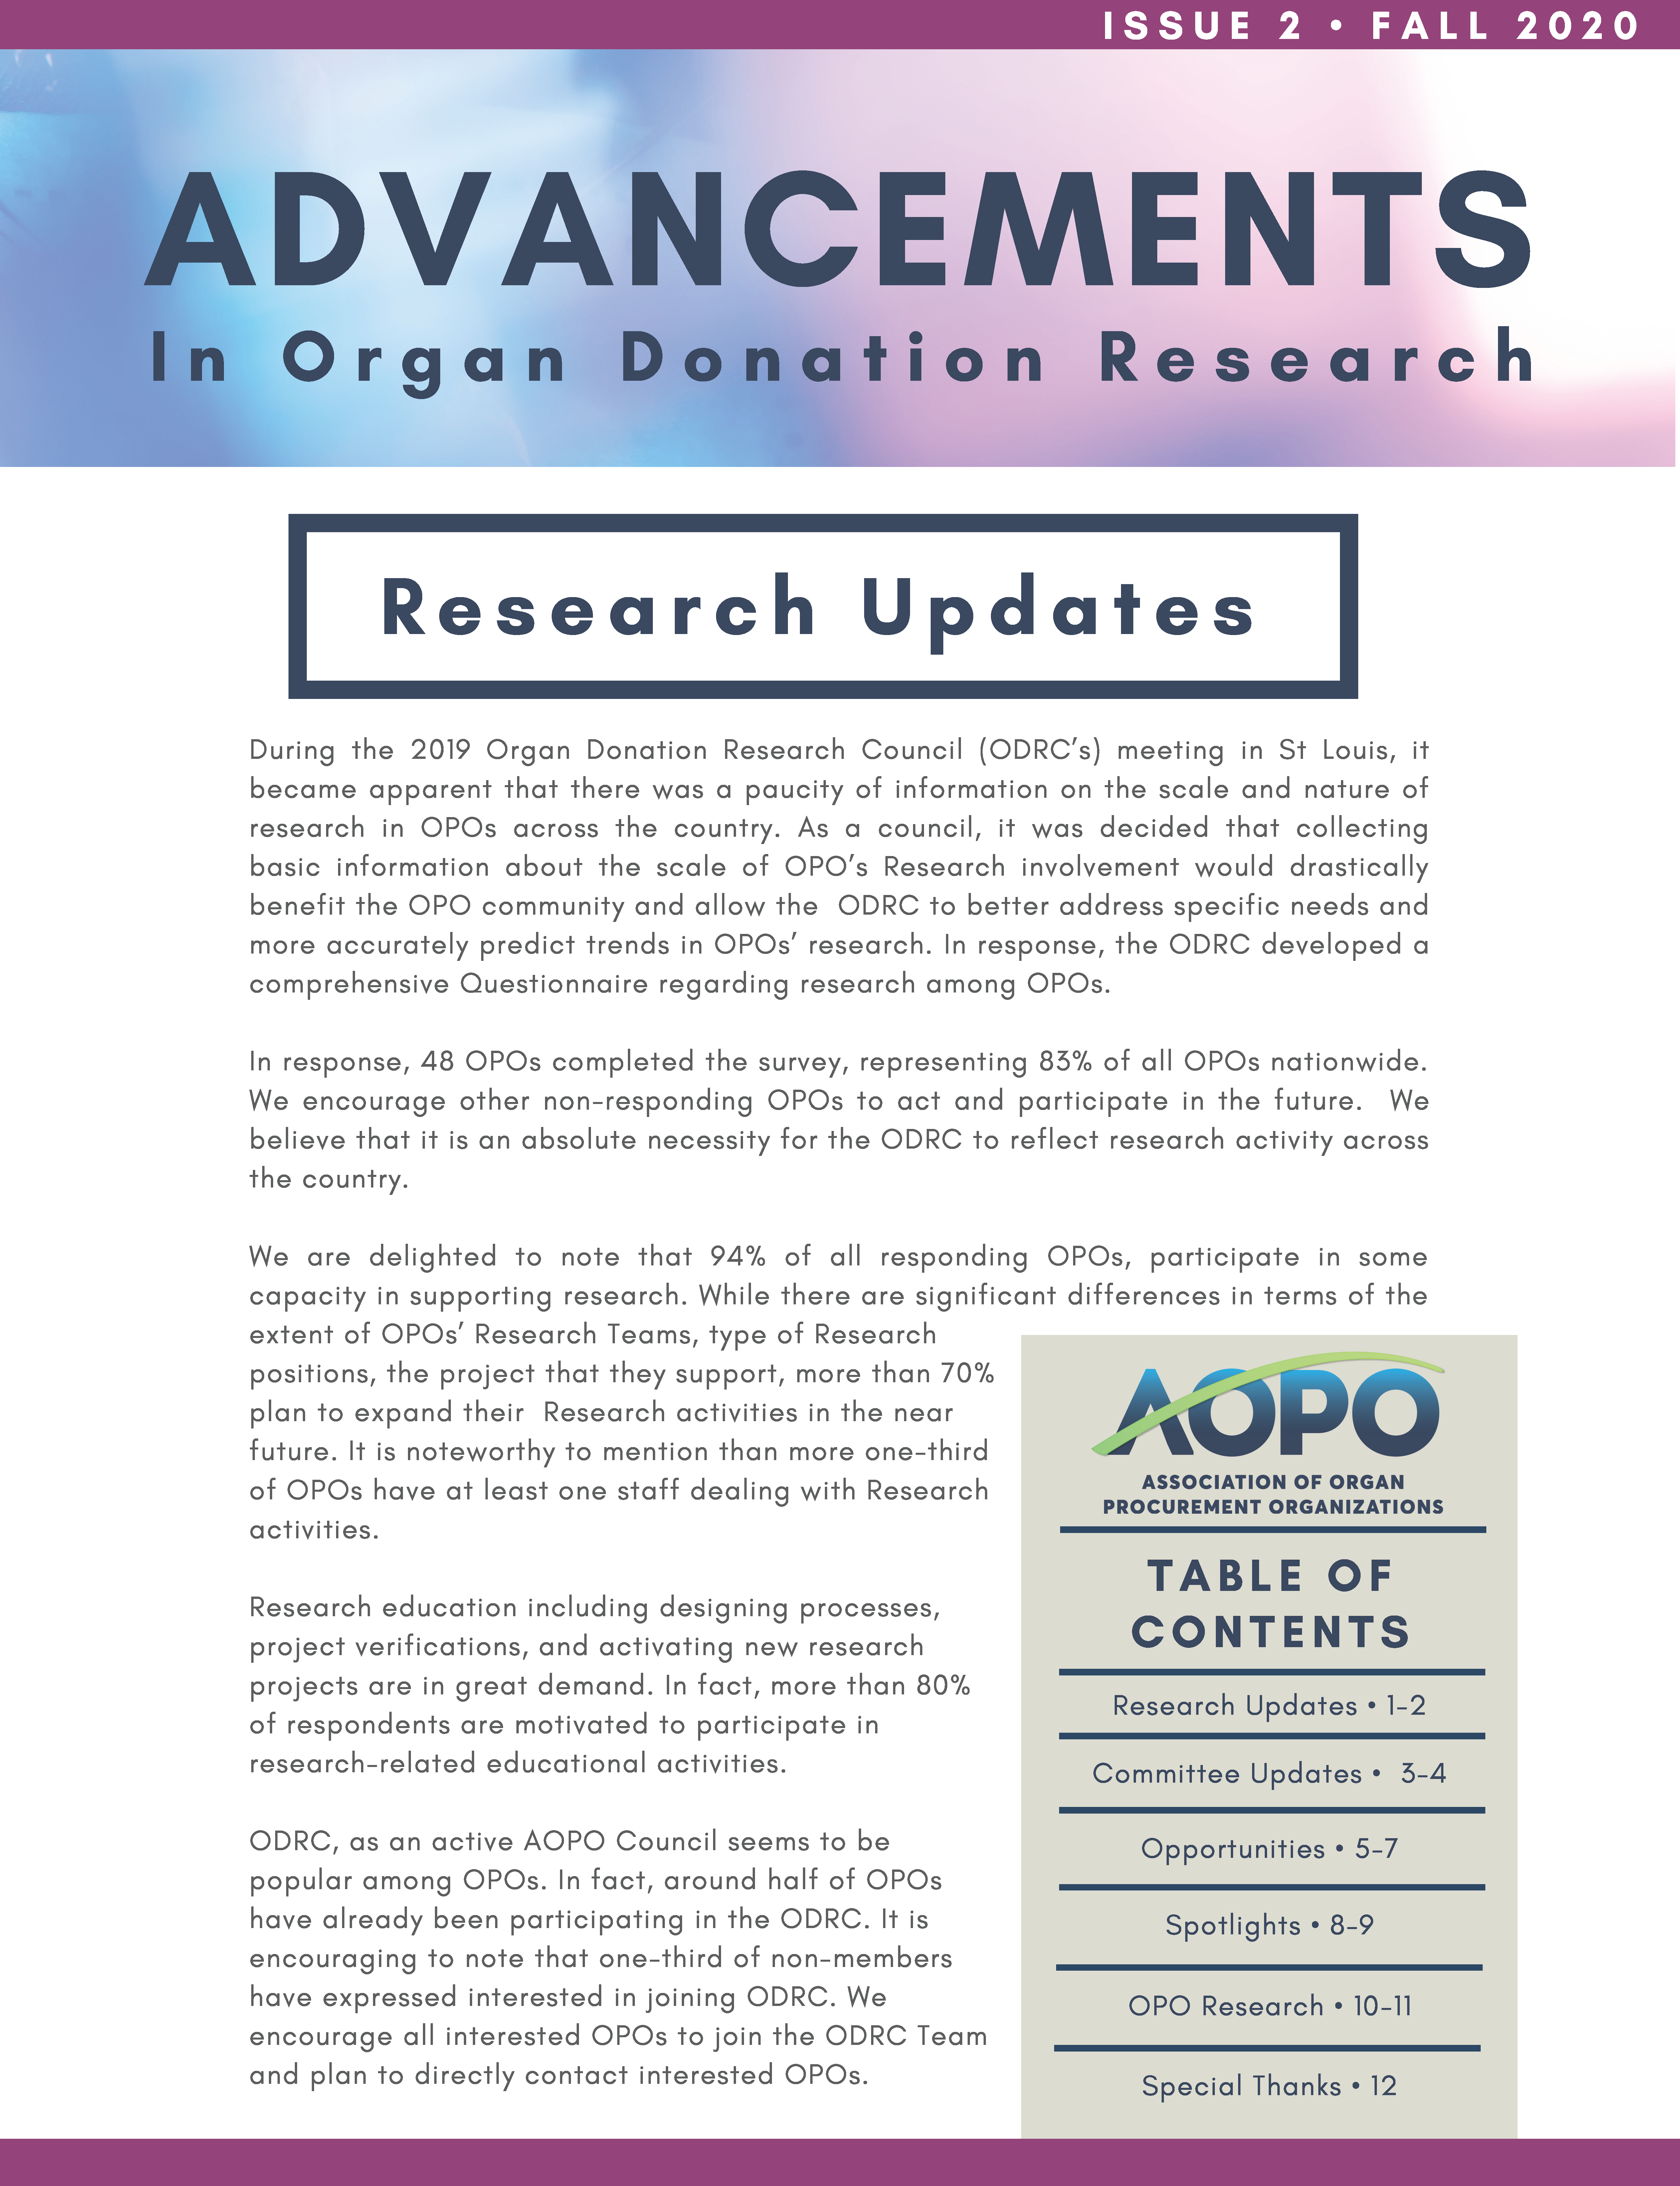 Advancements in Organ Donation Research (Fall 2020) Page 01